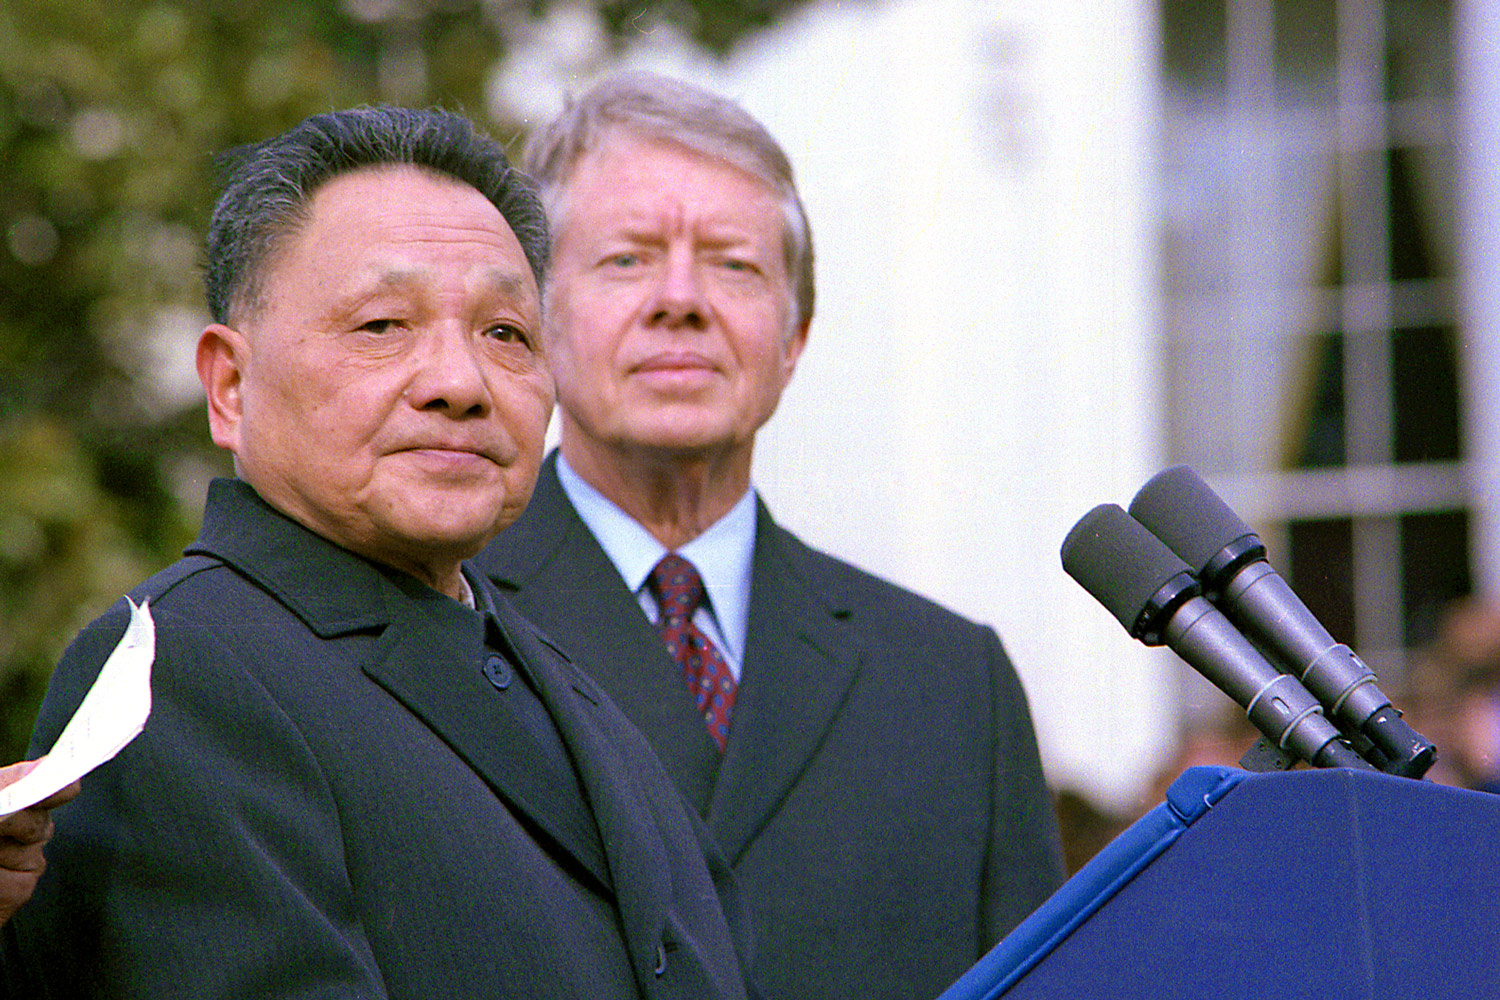 Deng Xiaoping's focus on economic development remains at the core of China's innovation. Seen here with former US president Jimmy Carter.